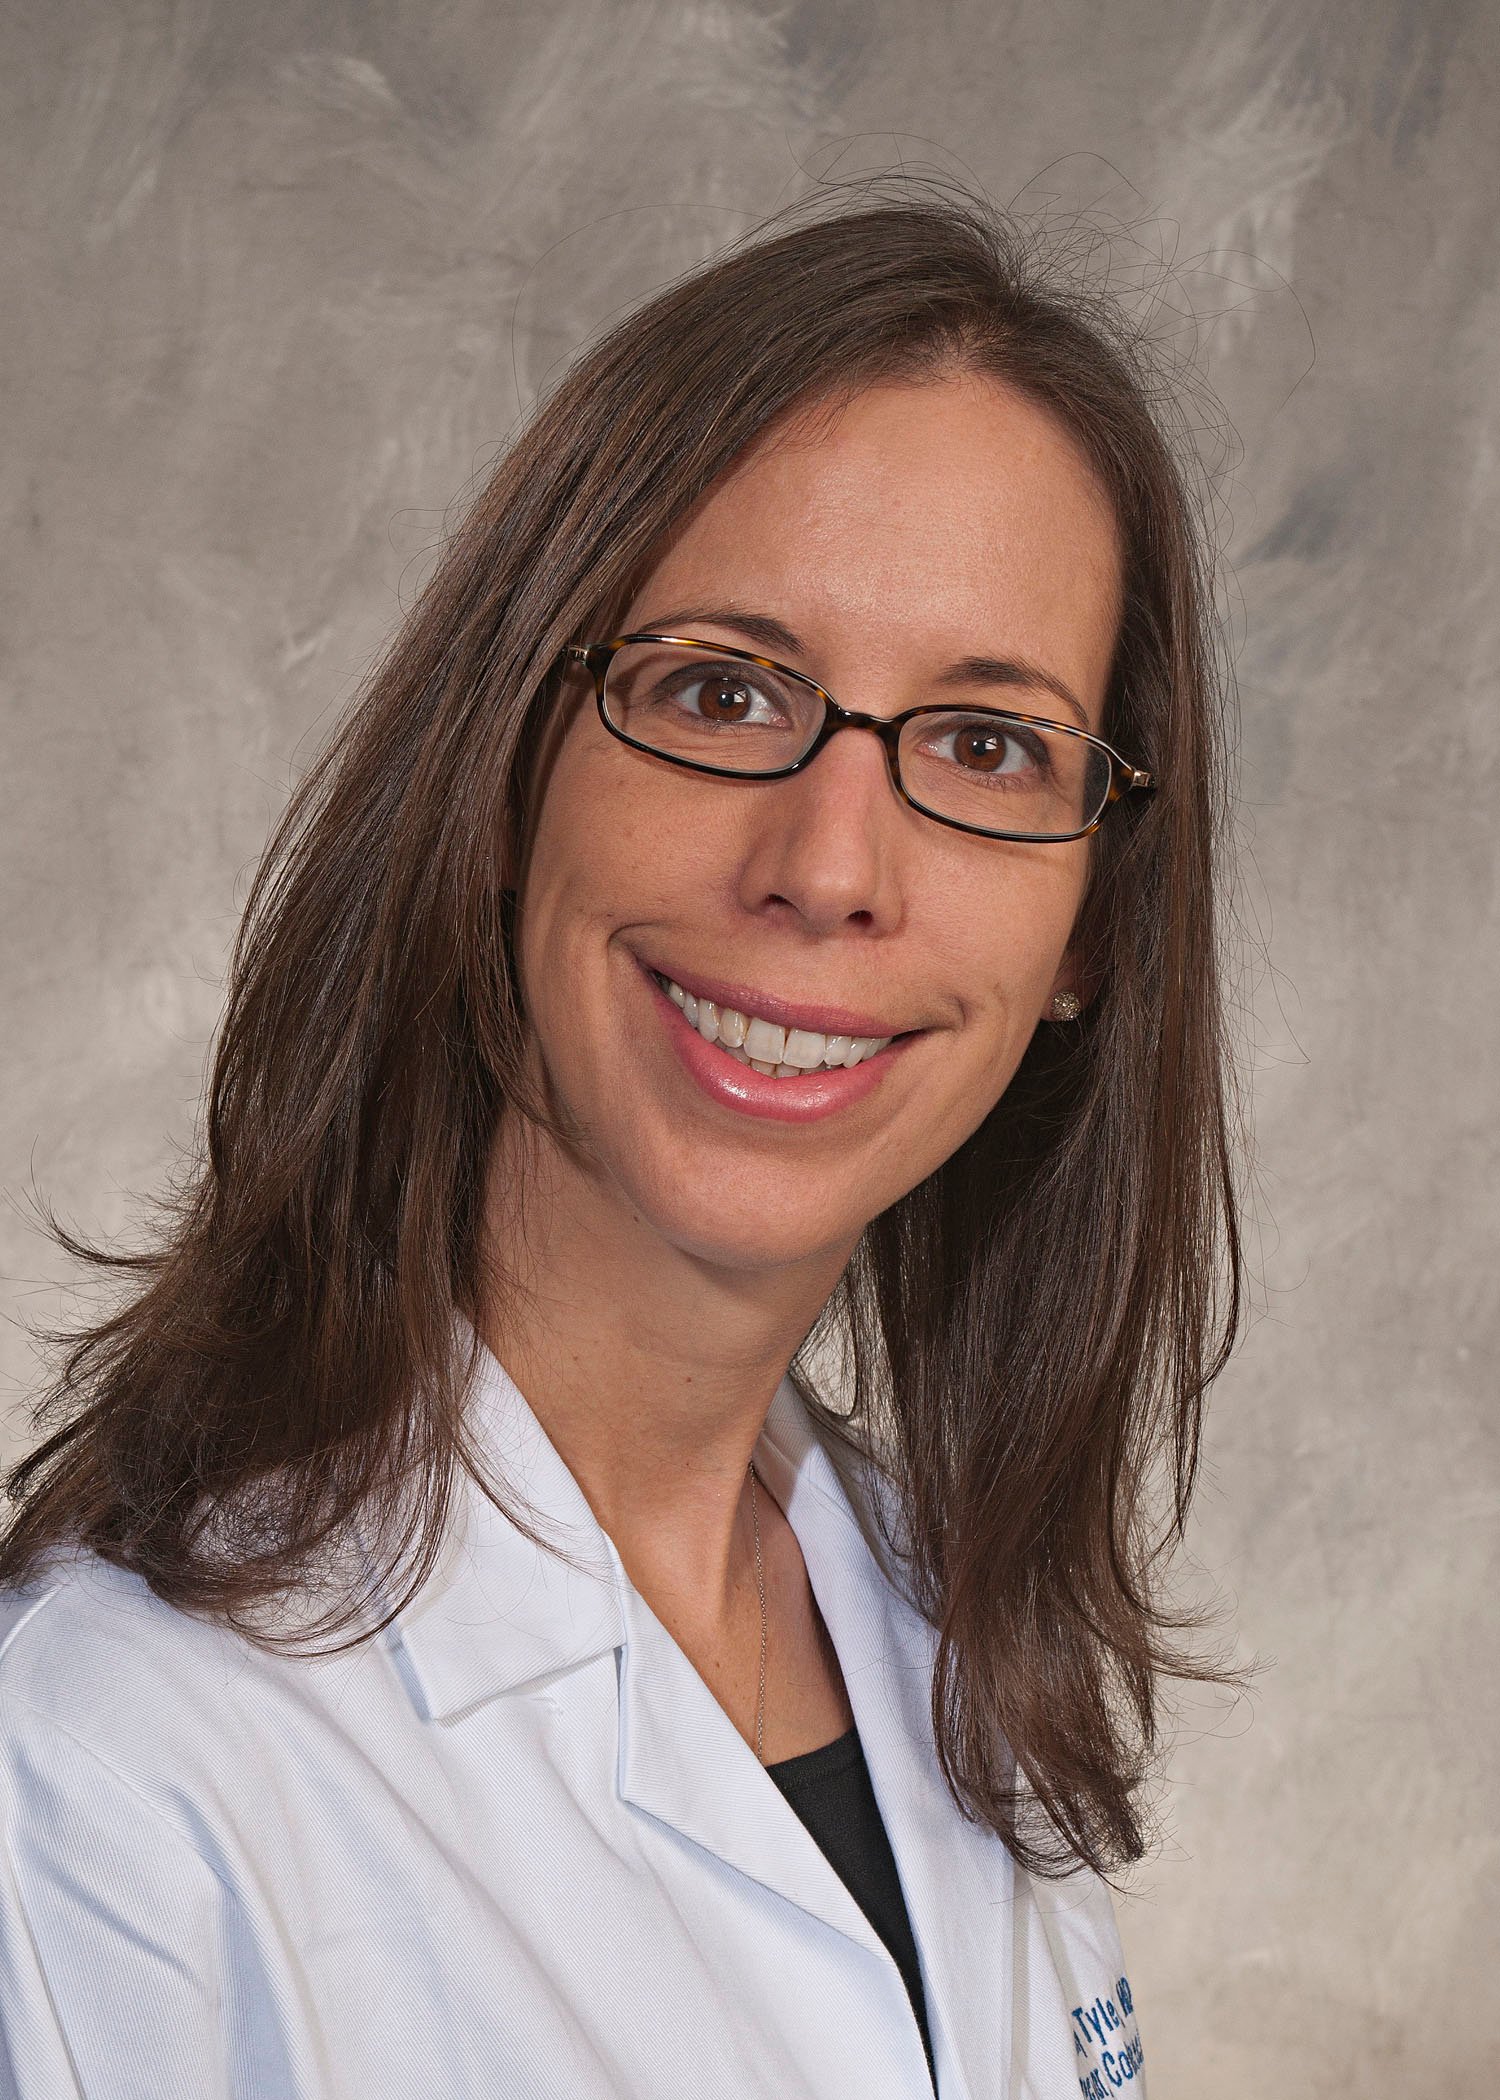 My Baystate Story: Kelly Tyler, MD, Division Chief, Colorectal Surgery, Baystate Medical Center